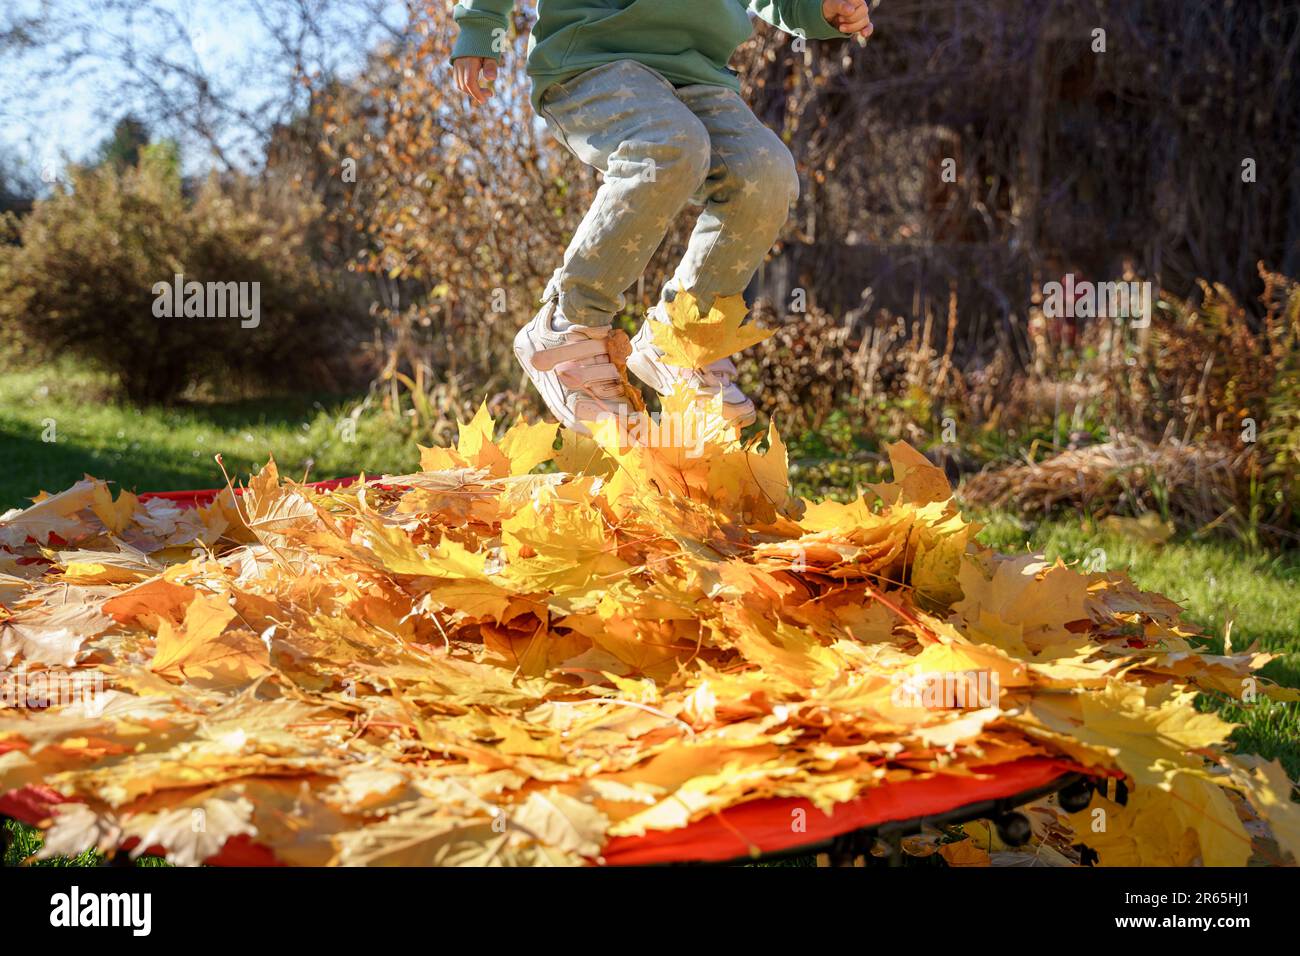 Girl kid jumping on trampoline with autumn leaves. Bright yellow orange maple foliage. Child walking, having fun, playing in fall backyard. Outdoor Stock Photo